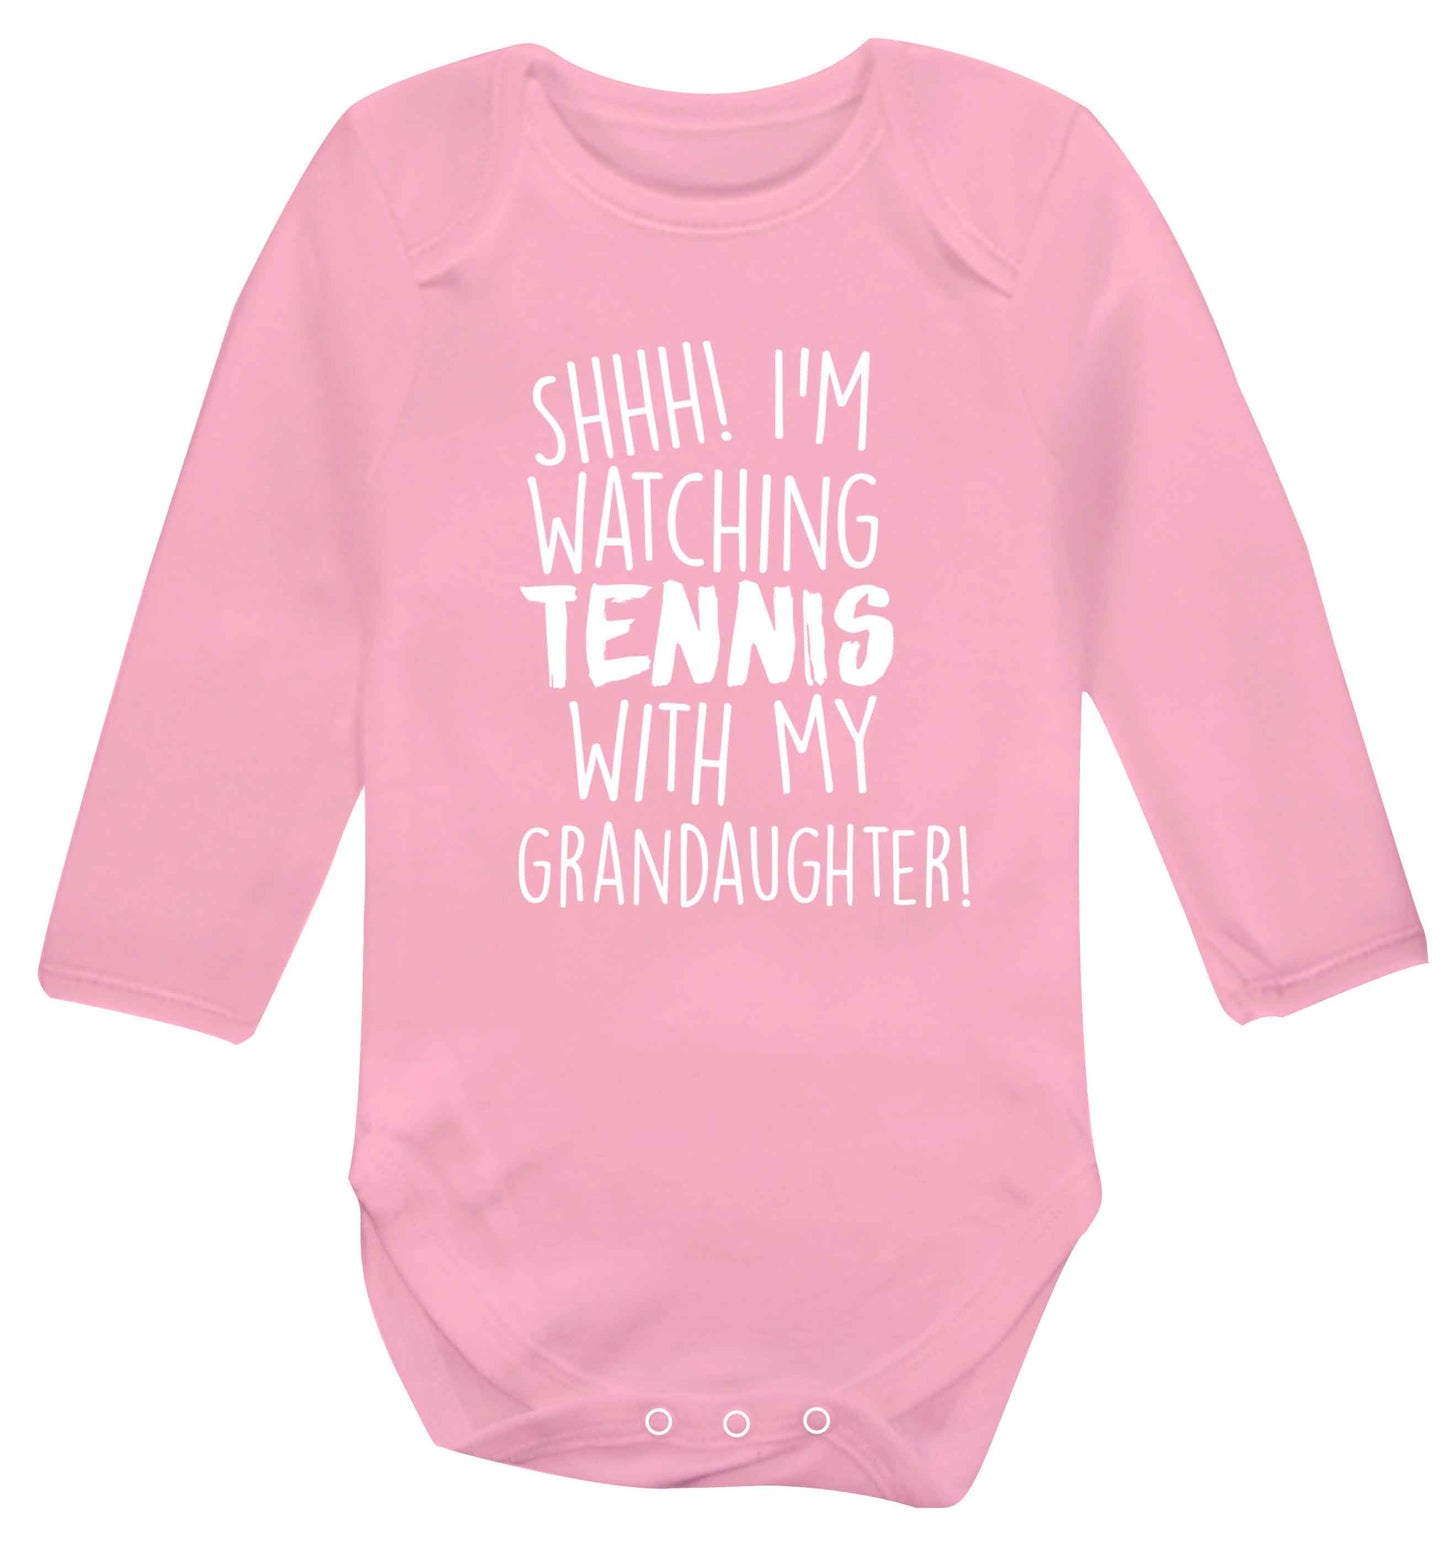 Shh! I'm watching tennis with my granddaughter! Baby Vest long sleeved pale pink 6-12 months